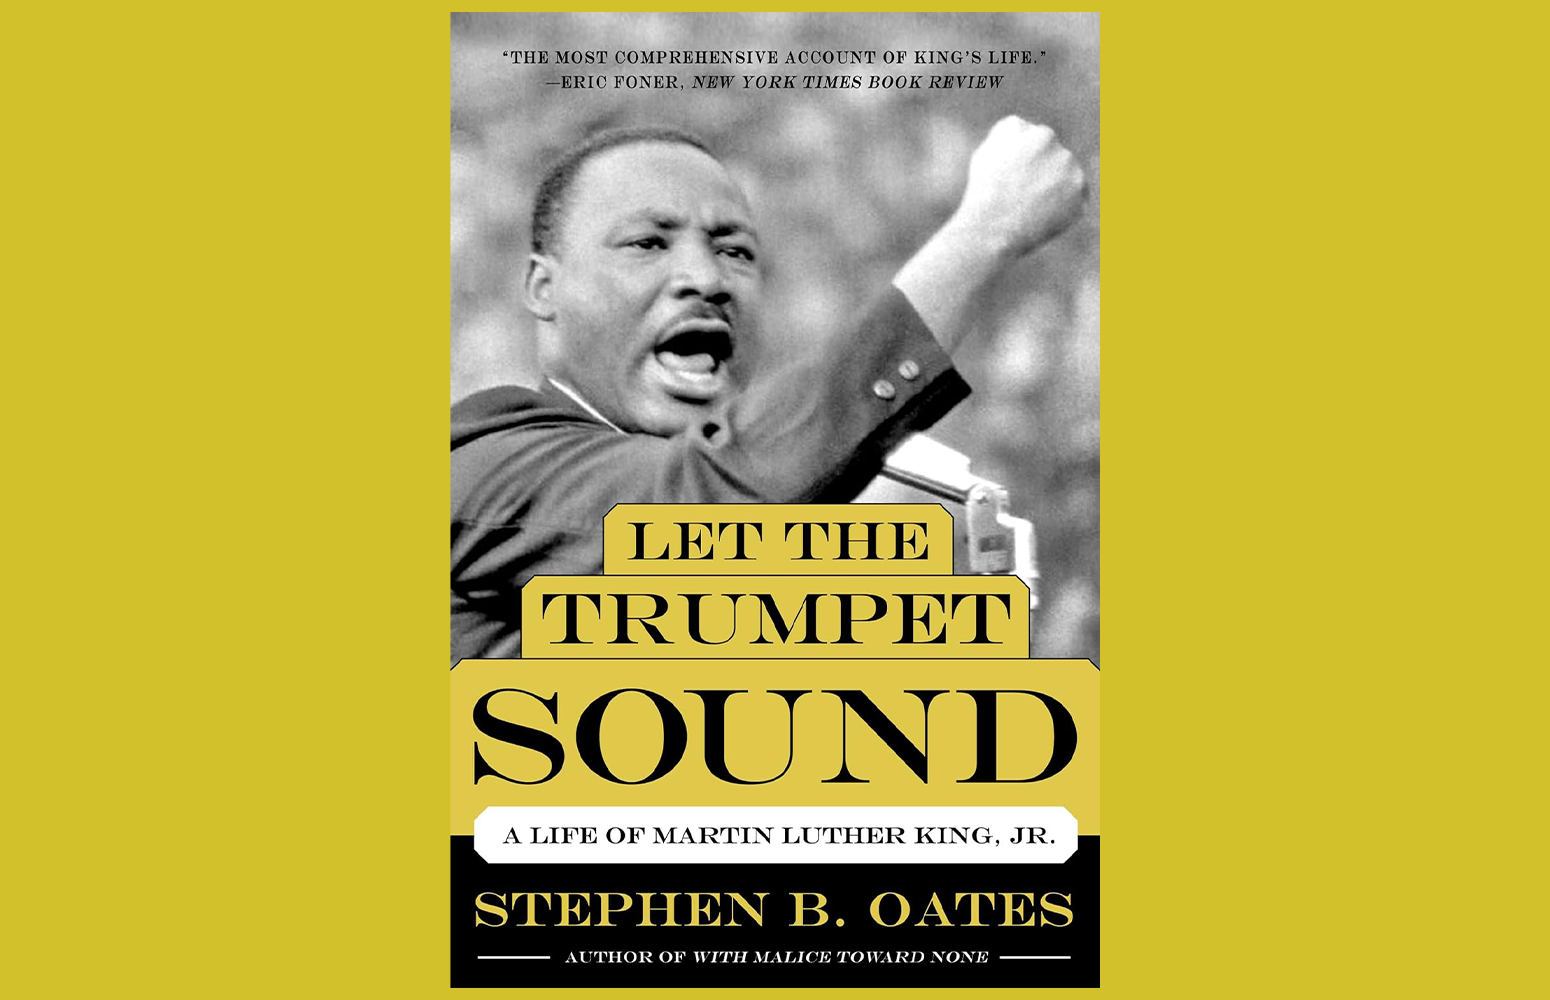 Let The Trumpet Sound: A Life Of Martin Luther King, Jr. 8 of 15